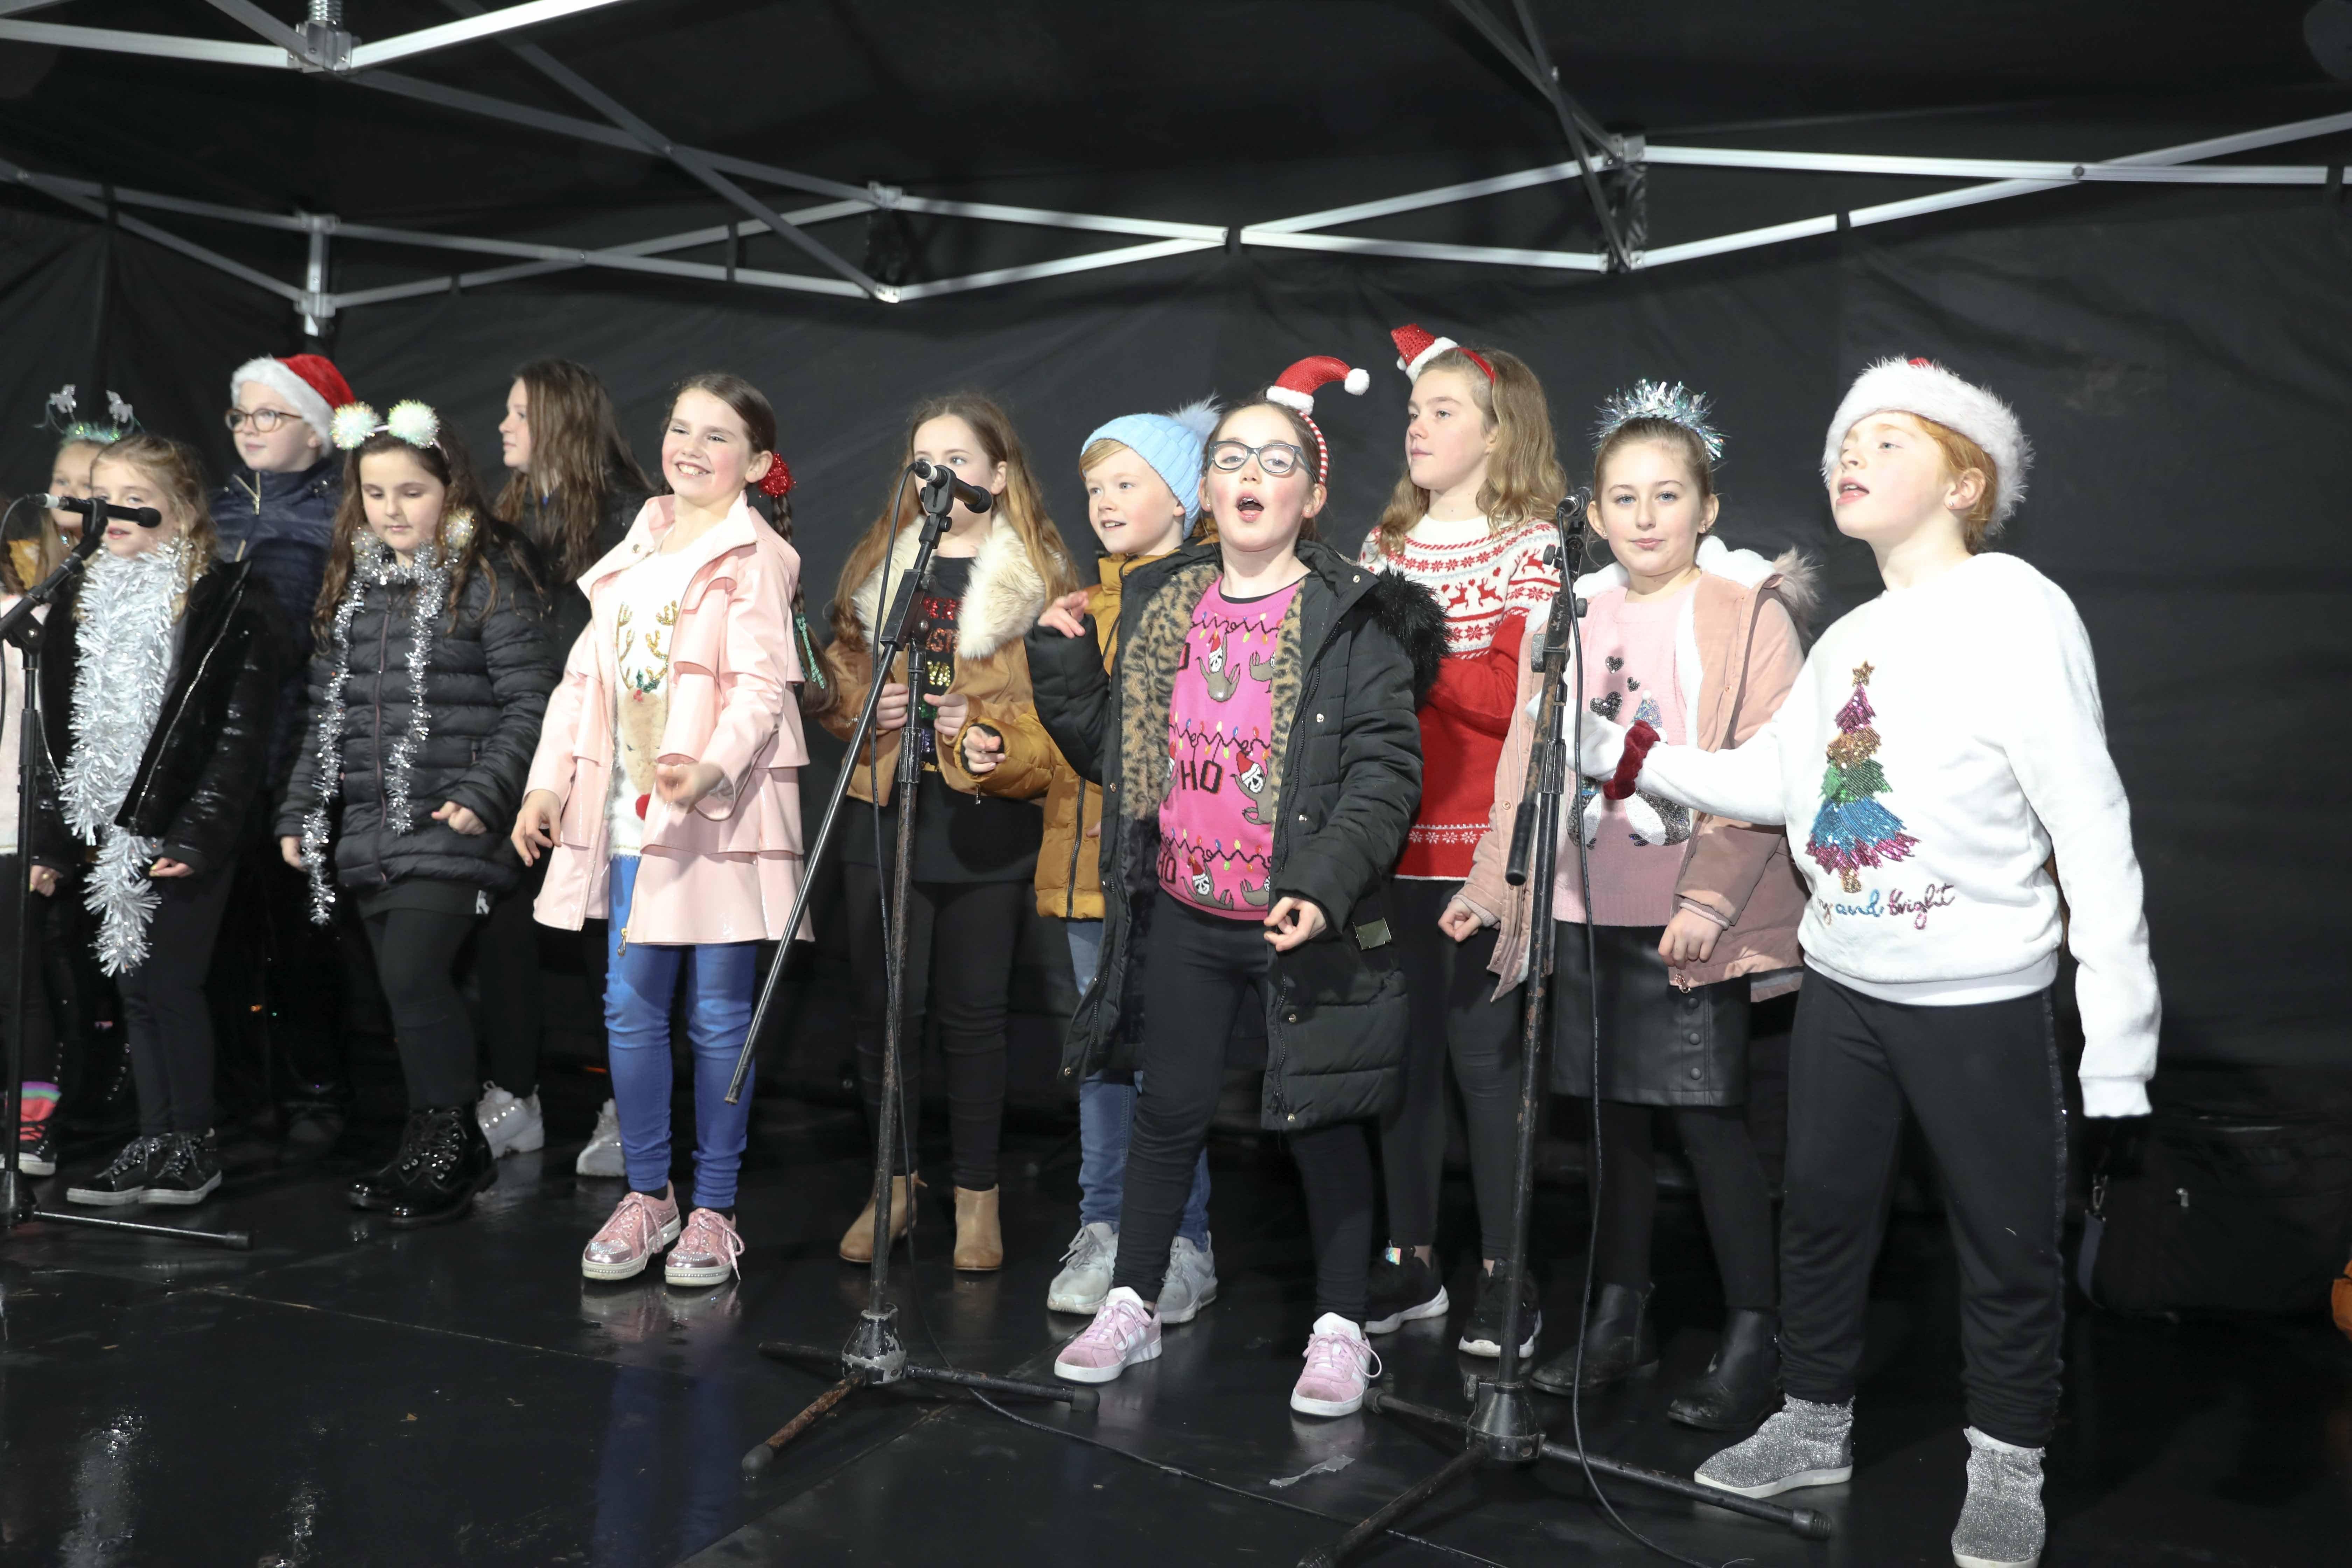 Christmas lights switch-on in Bo'ness on Saturday, November 23. Children join in the singing. Picture by Jamie Forbes.